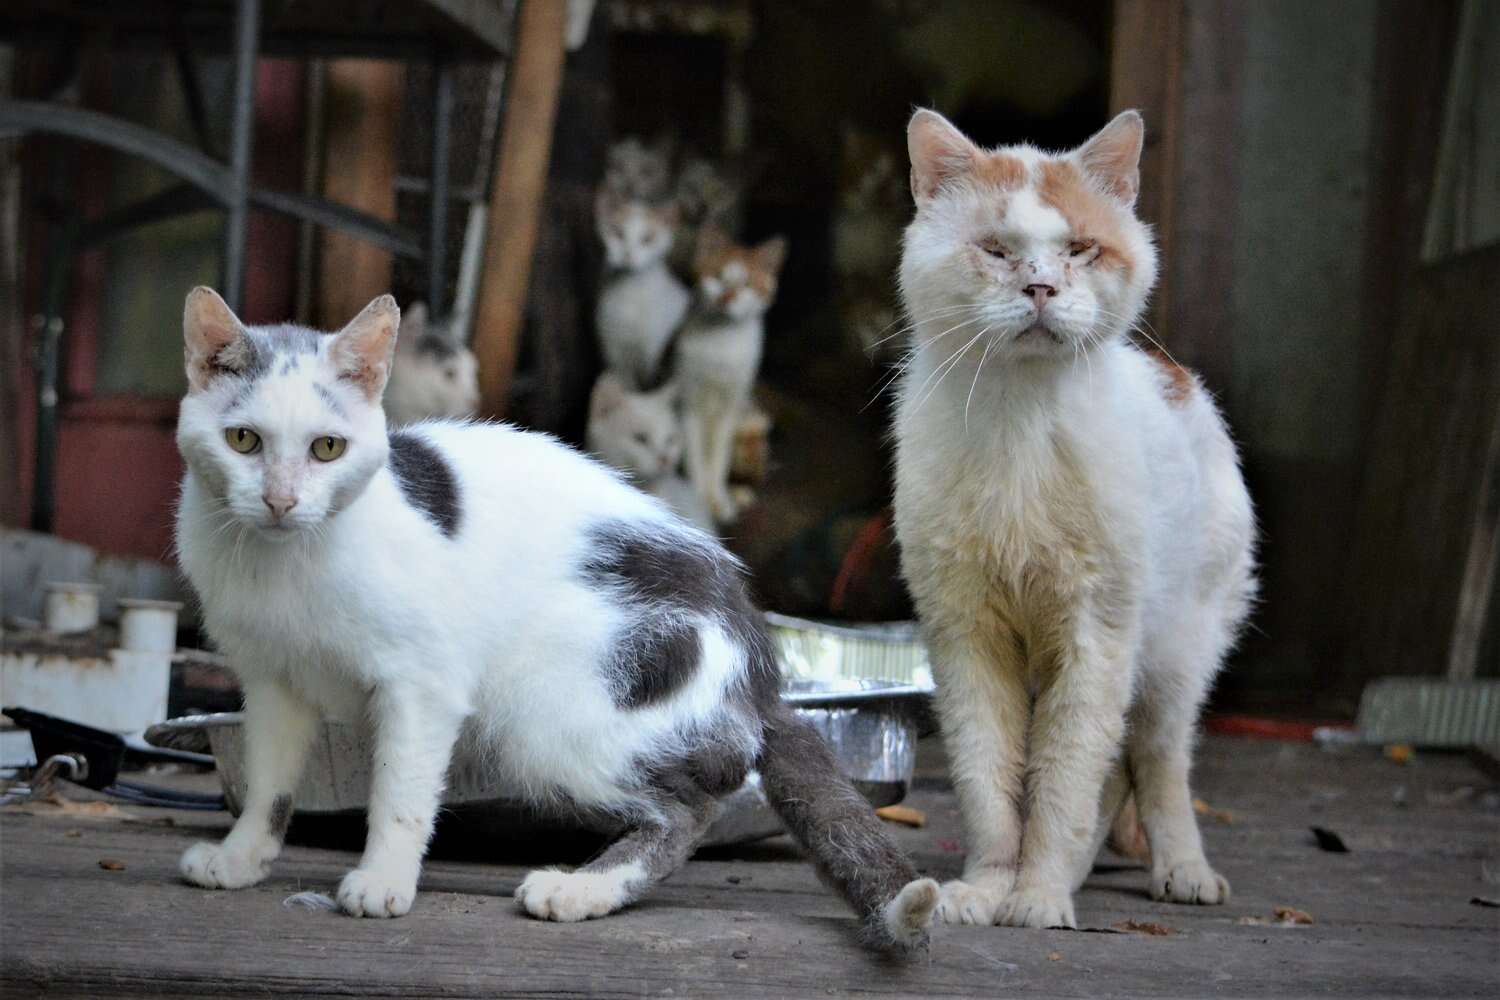 187 cats rescued